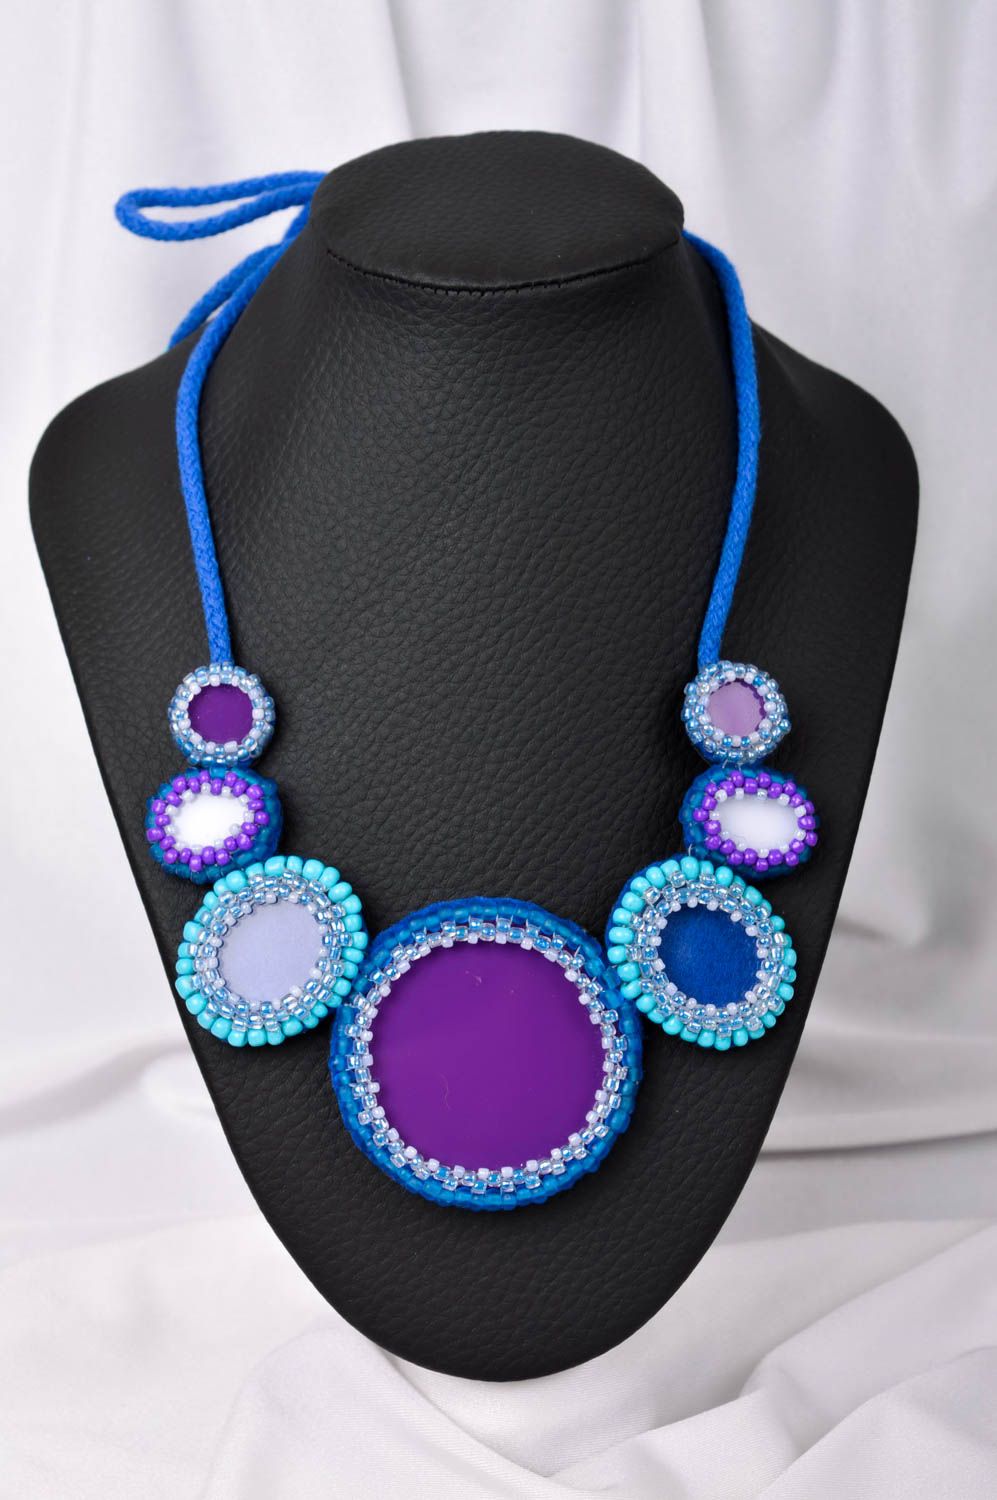 Handmade textile necklace beaded necklace beadwork ideas gifts for her photo 1